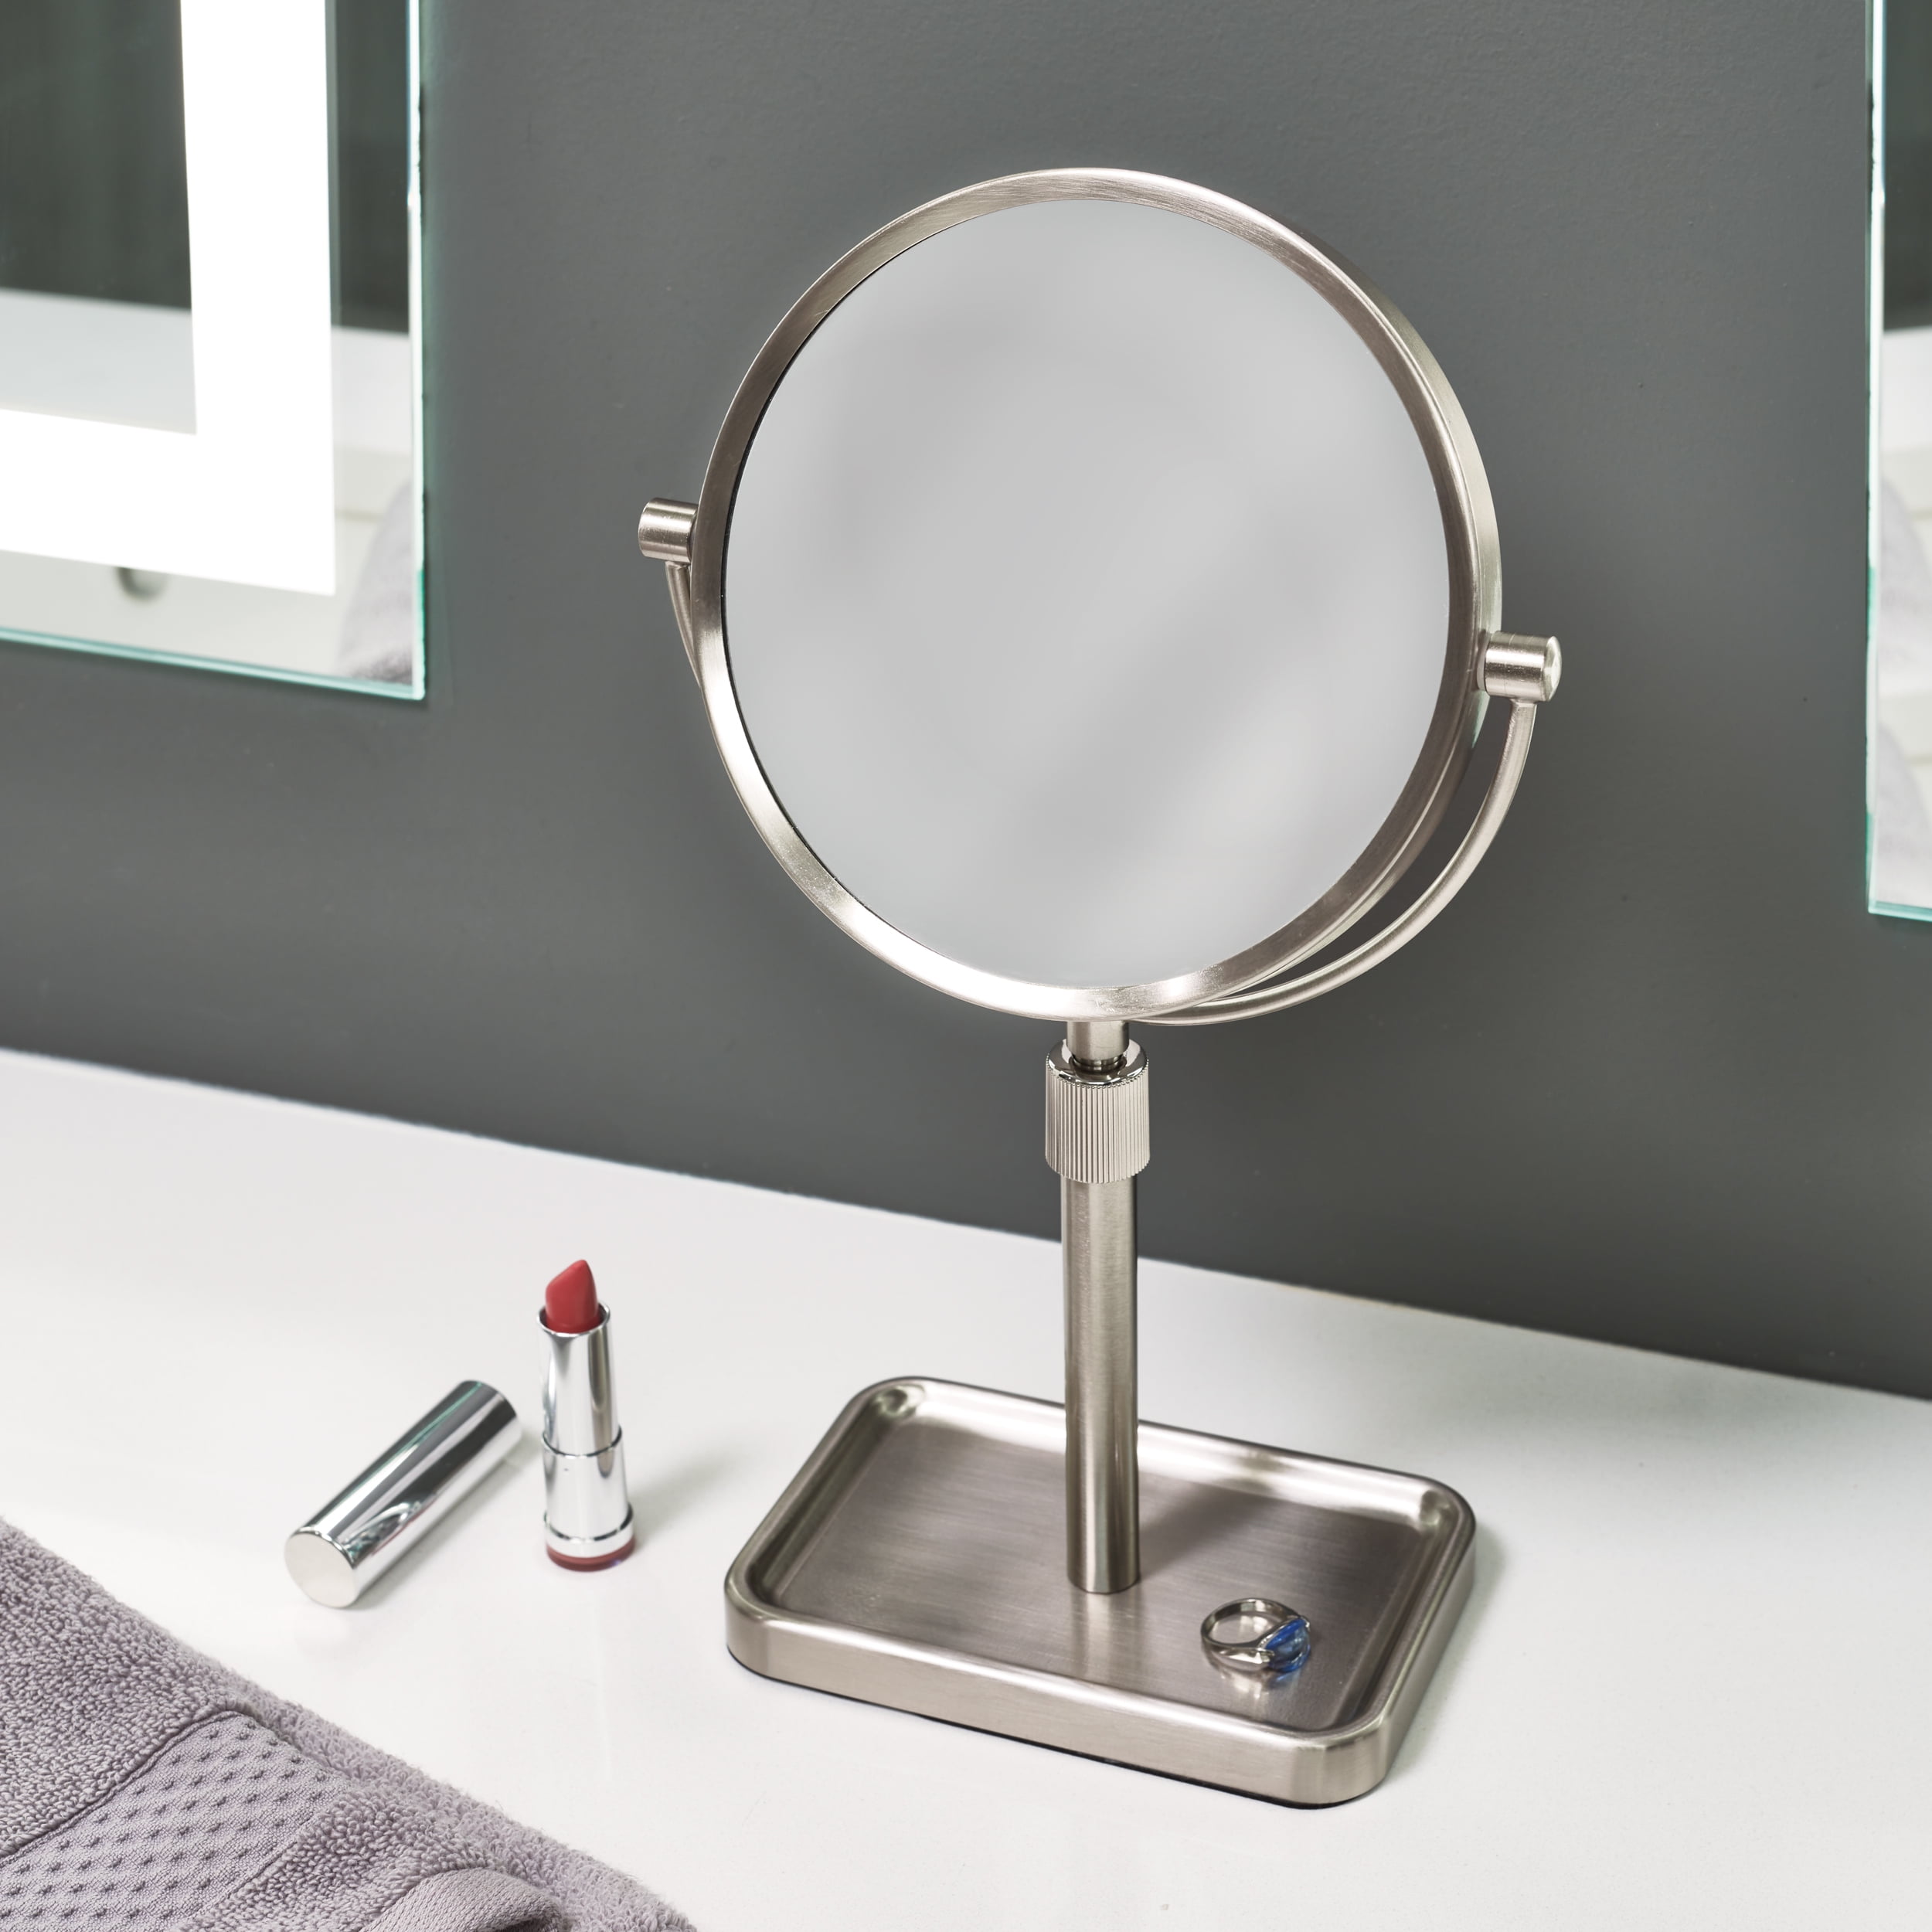 Better Homes & Gardens Extendable Two-Sided Free Standing Vanity Mirror, Brushed Nickel Finish